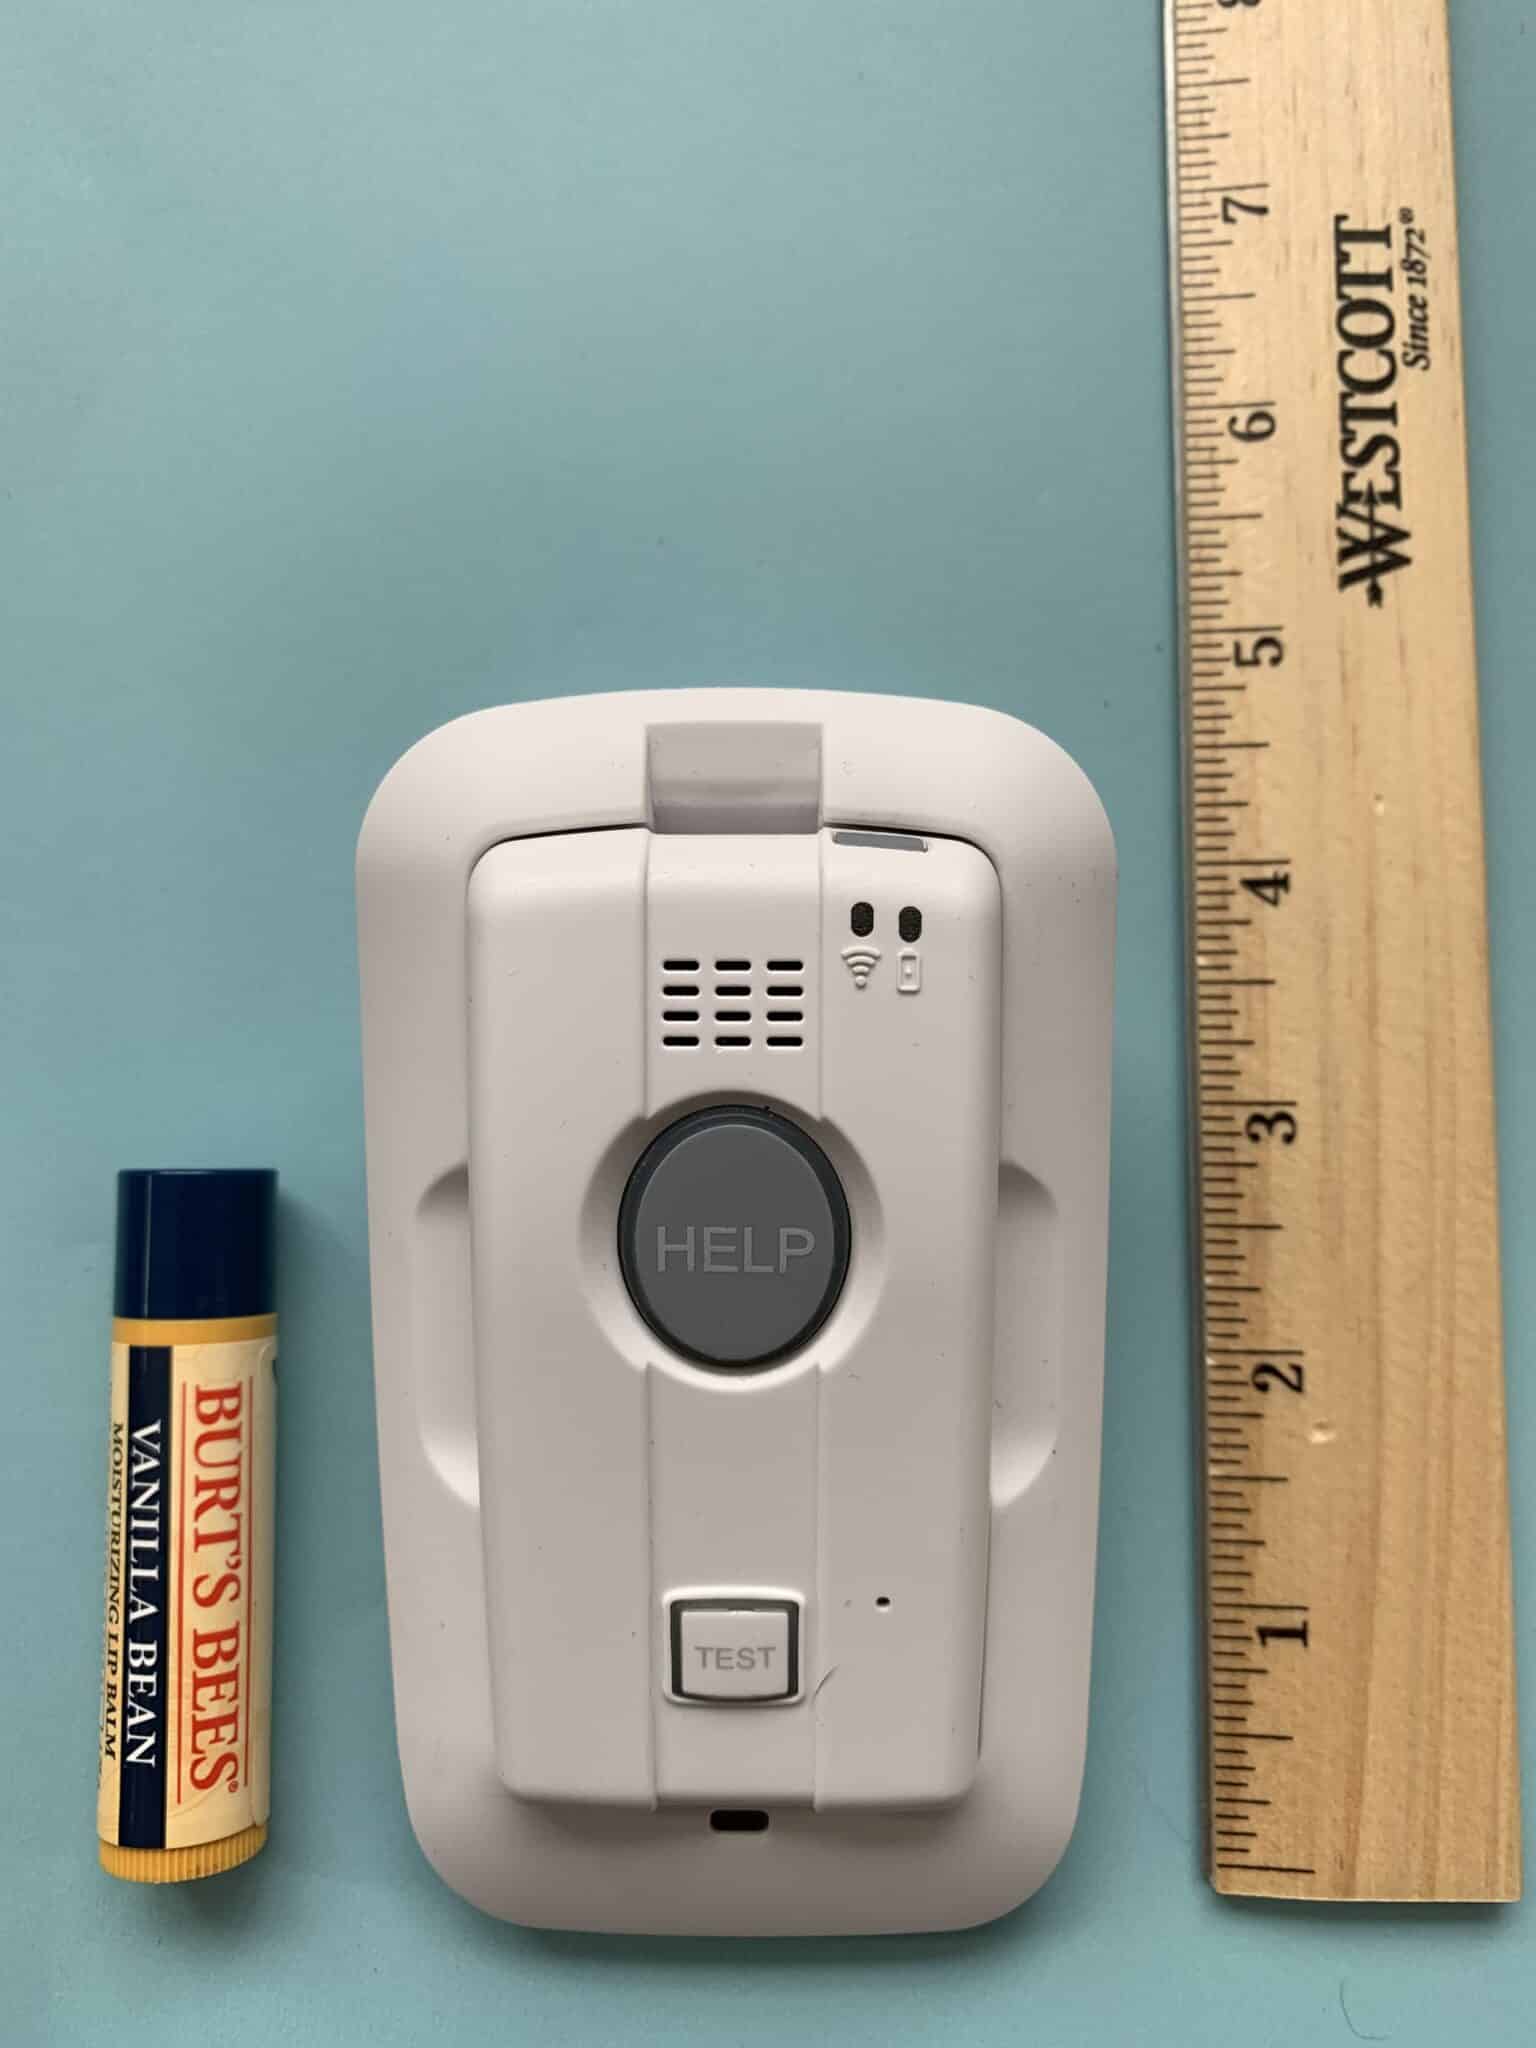 Elite 911 medical alert device next to a tube of lip balm and ruler for size comparison